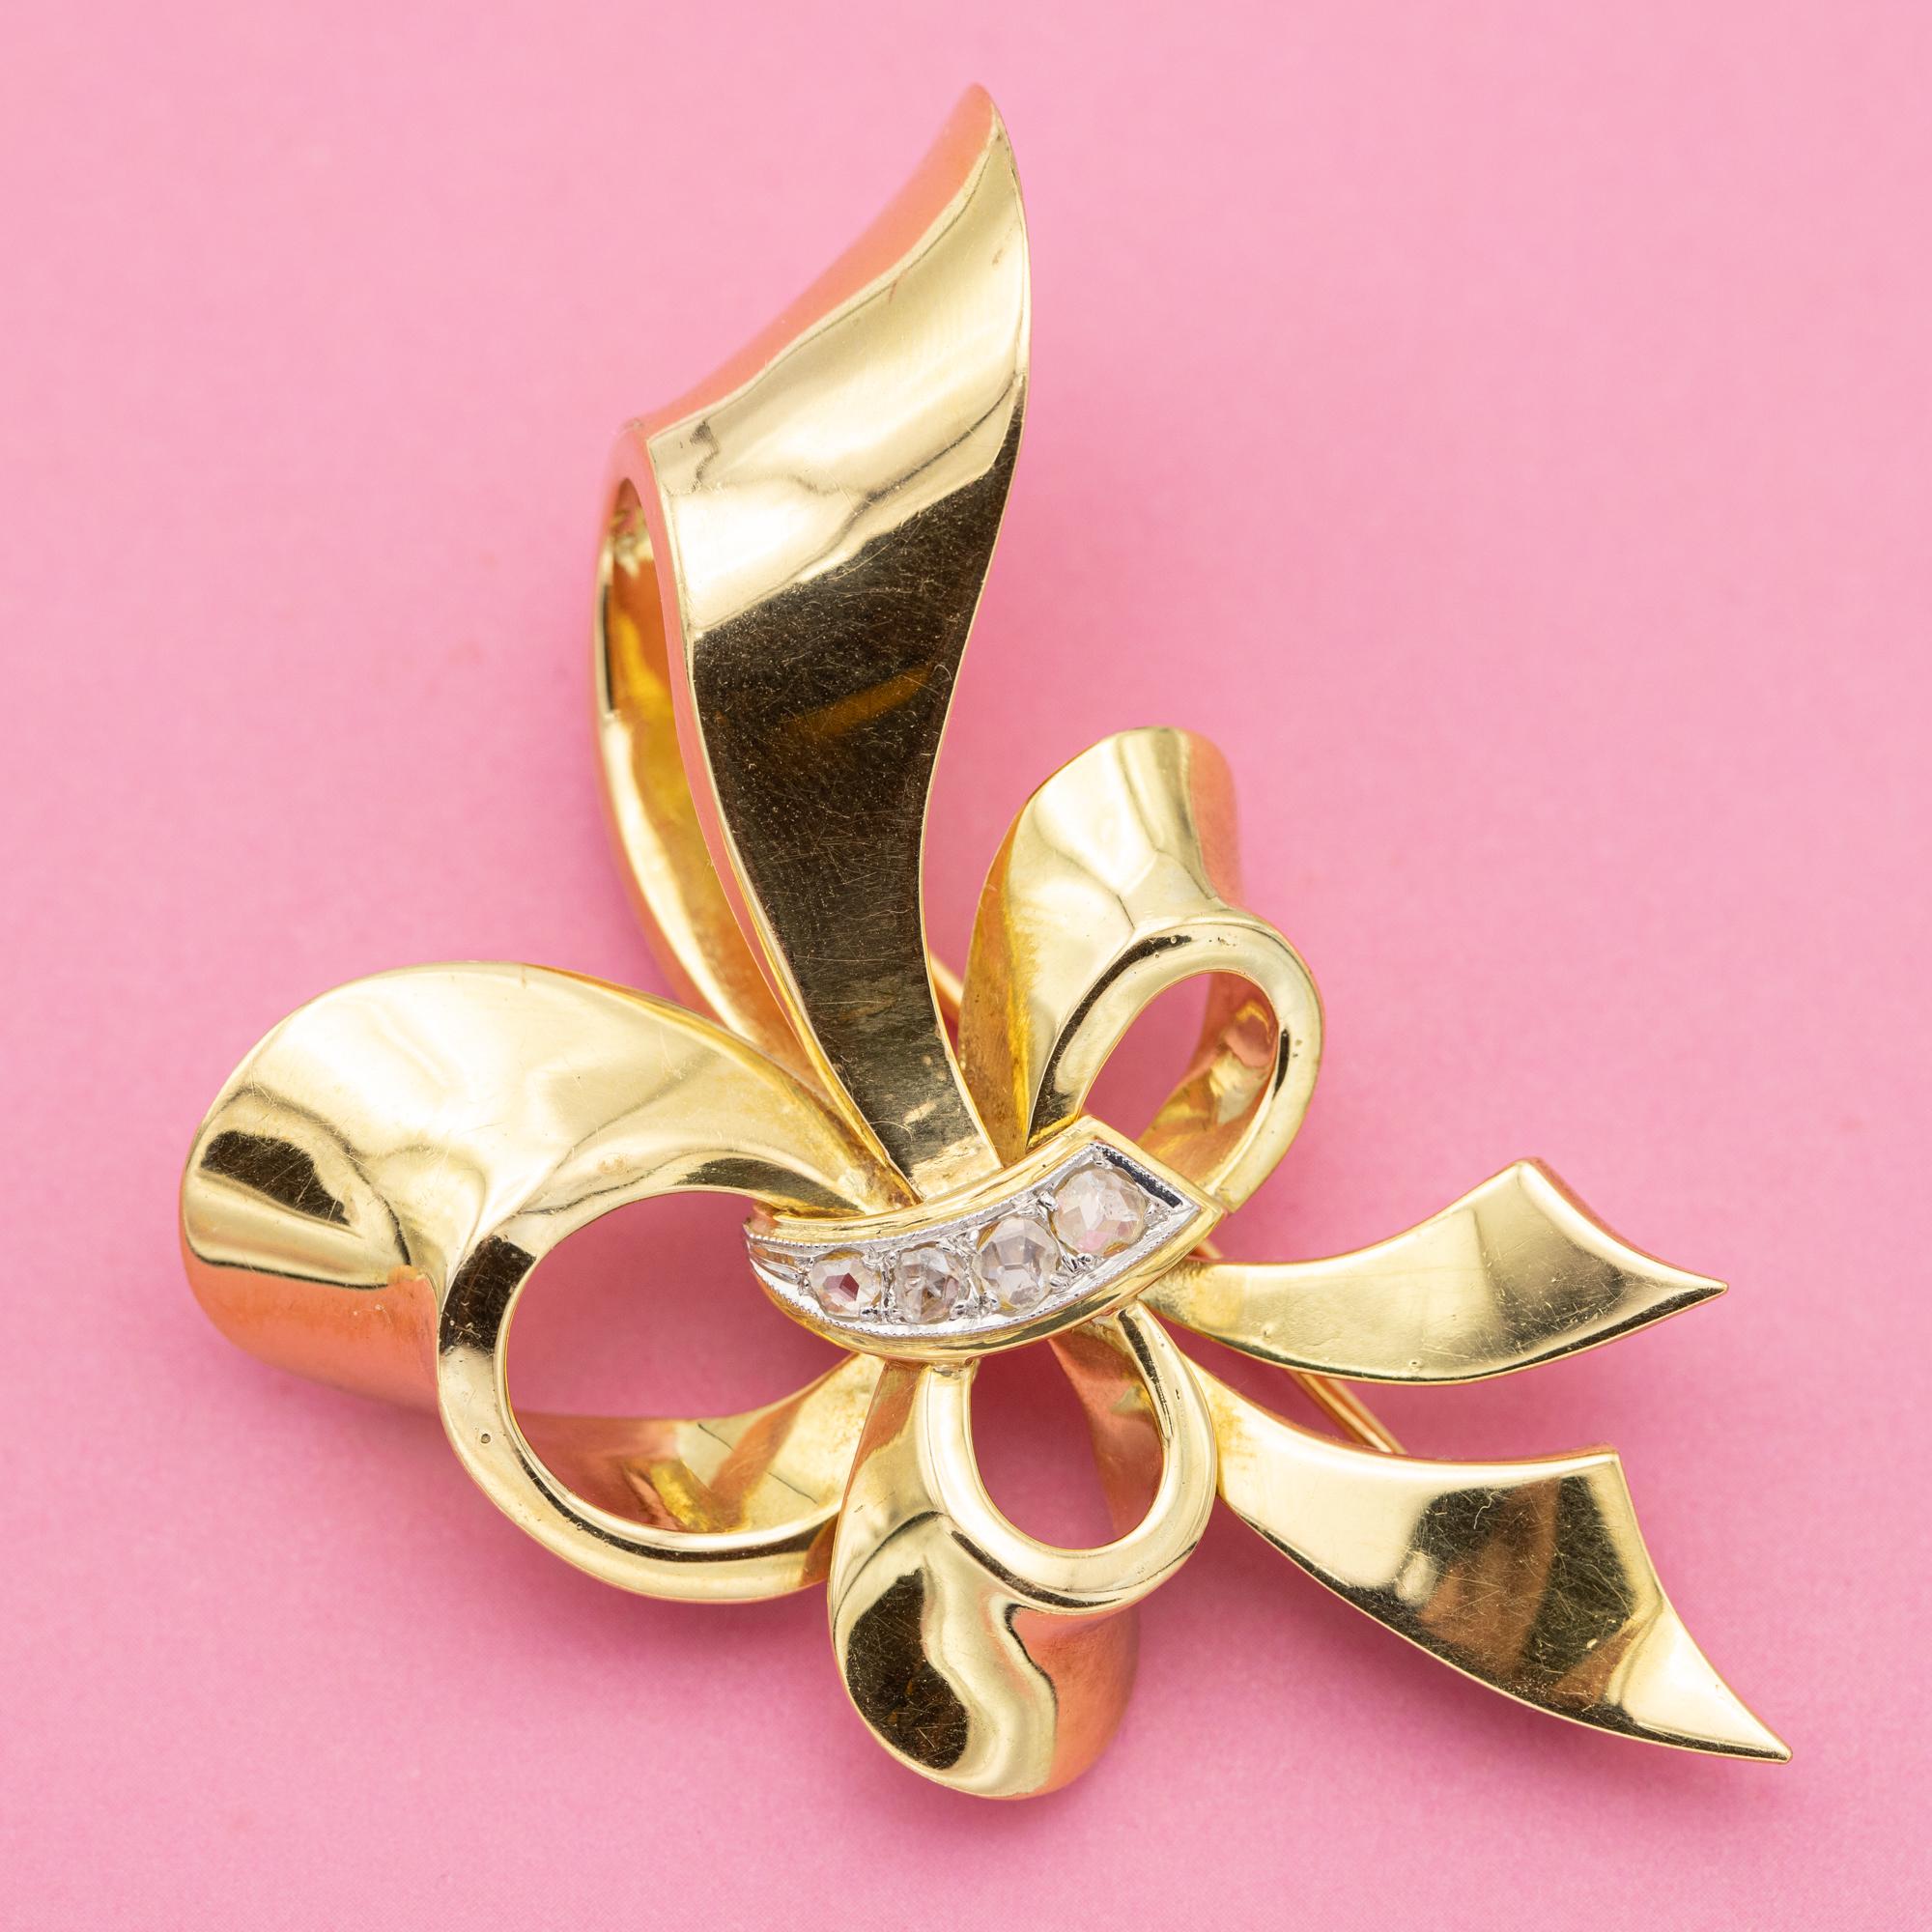 Heavy Elegant 18k bow Brooch - 1940's collar pin - solid gold rose cut diamonds For Sale 1